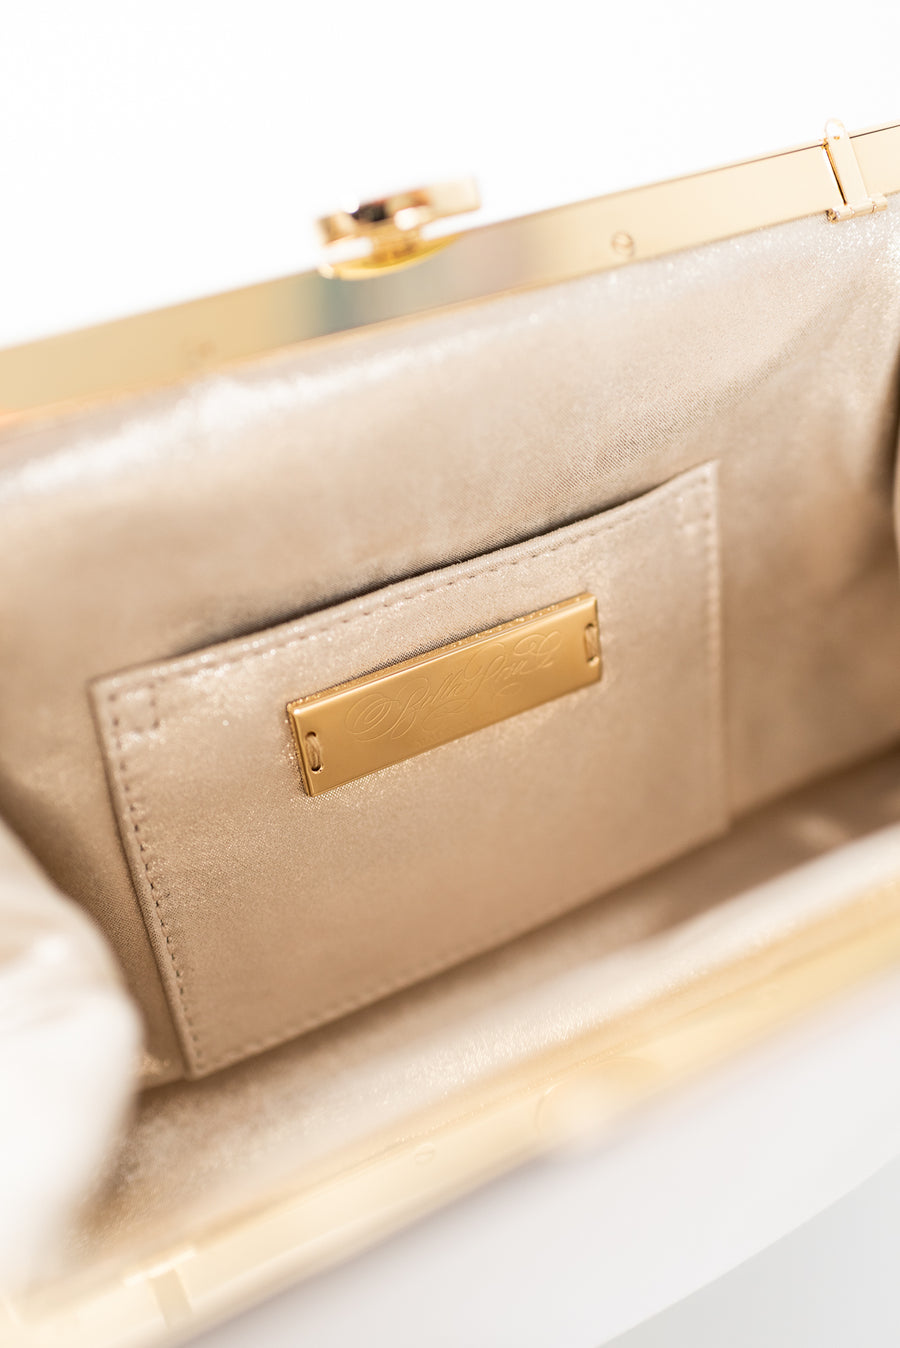 Close up open view of Rosa Clutch in Ivory white satin with gold hardware clasp frame.